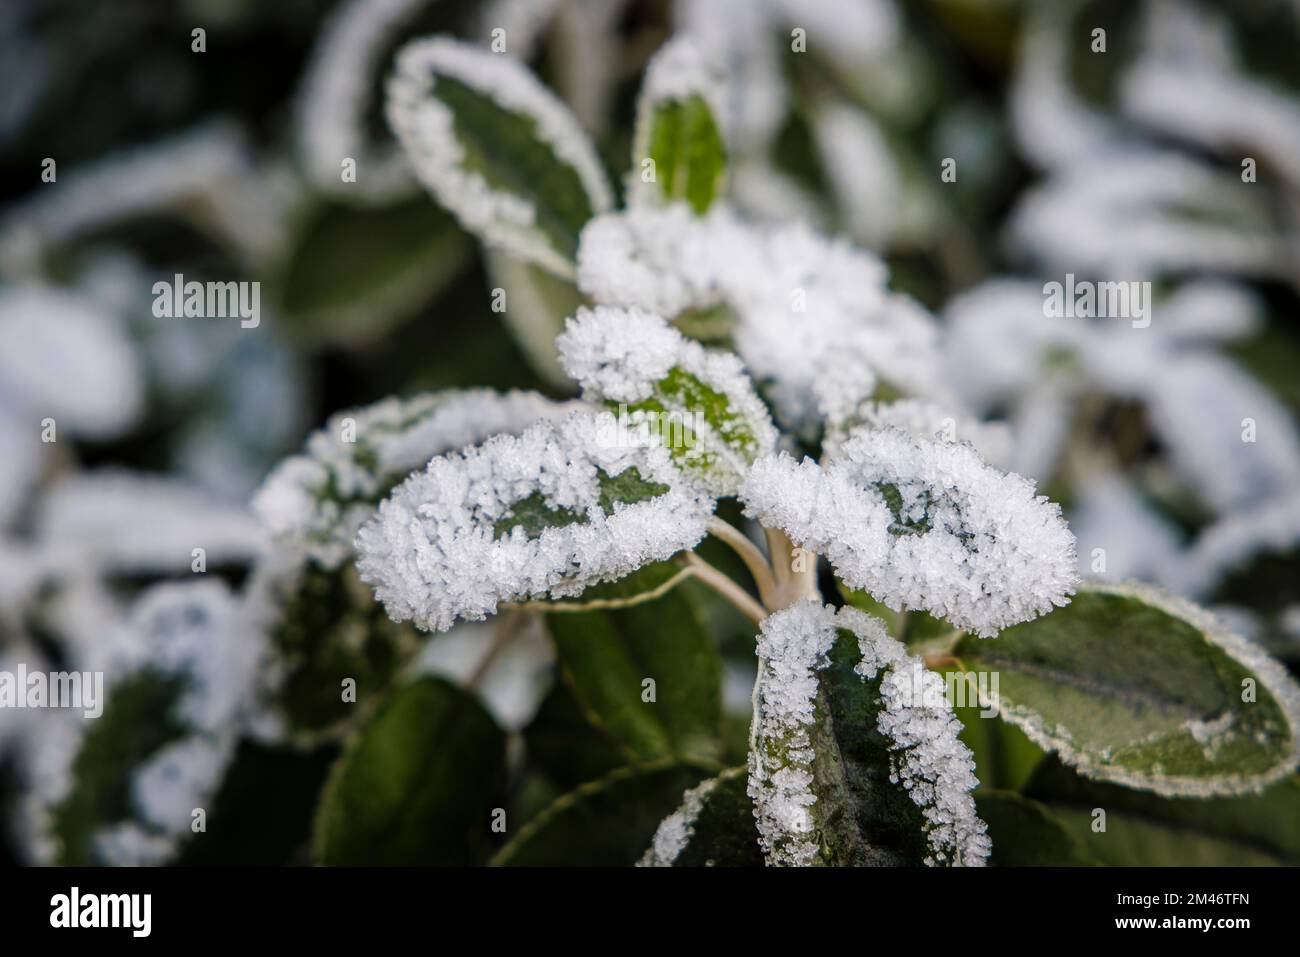 Frost and ice crystals on Brachyglottis (Dunedin Group) 'Sunshine' a silver leaved plant in a garden in cold weather low winter temperatures in Surrey Stock Photo